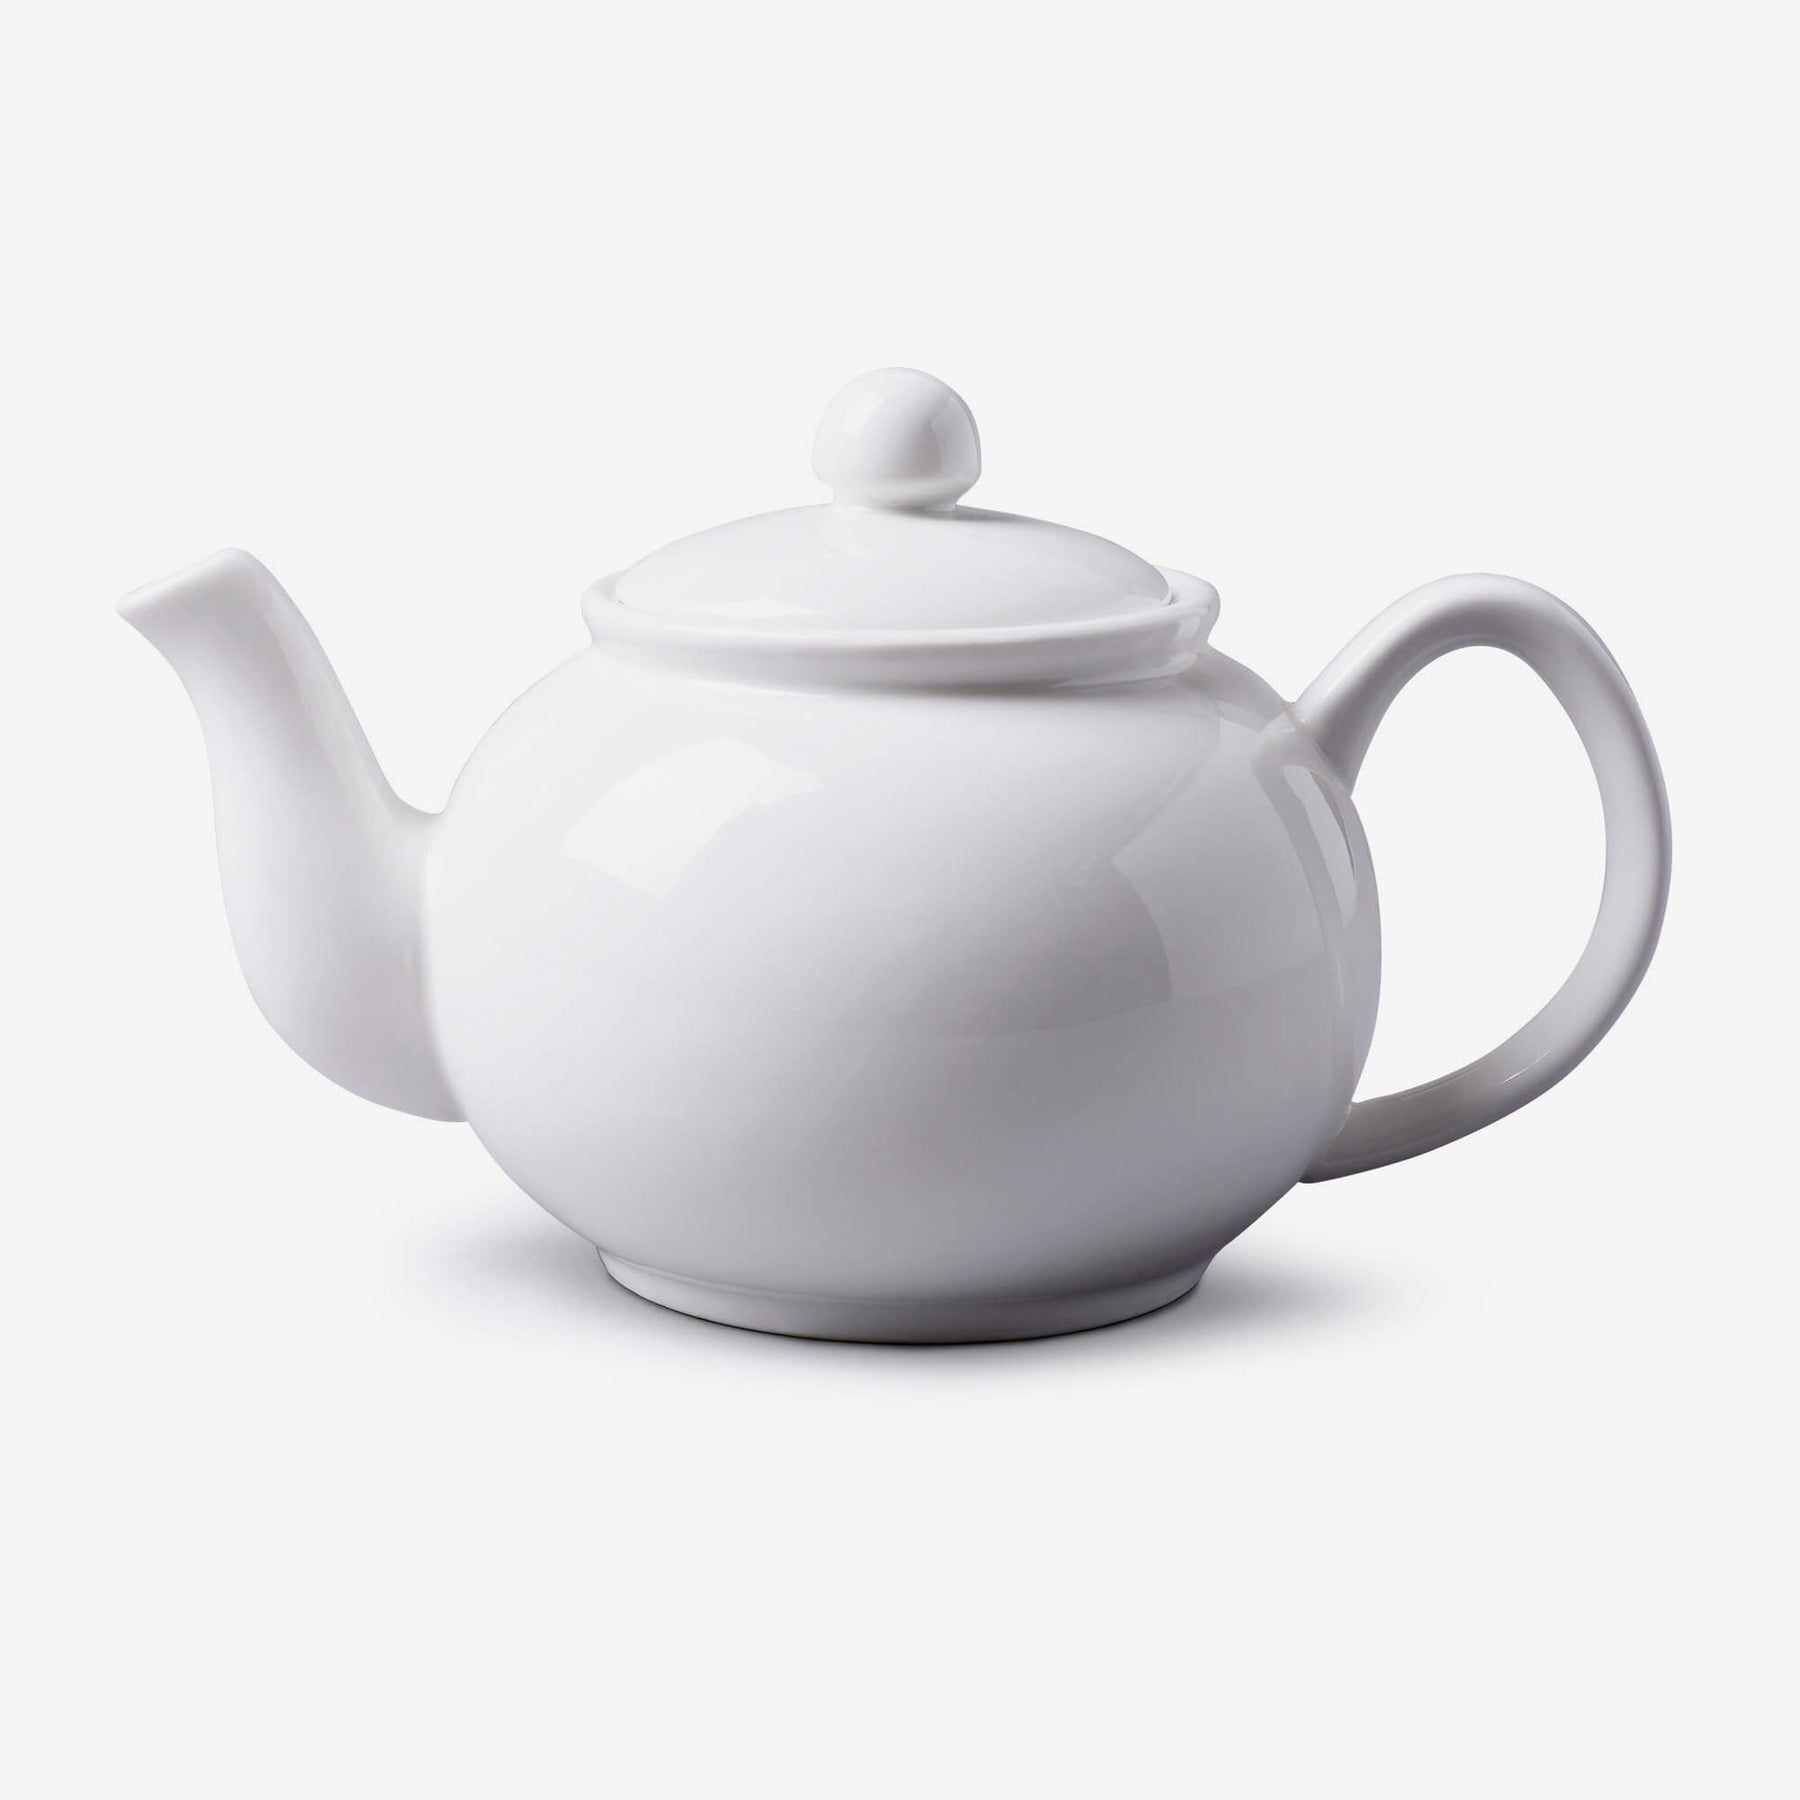 Porcelain Traditional Teapot, Available in 2 Sizes